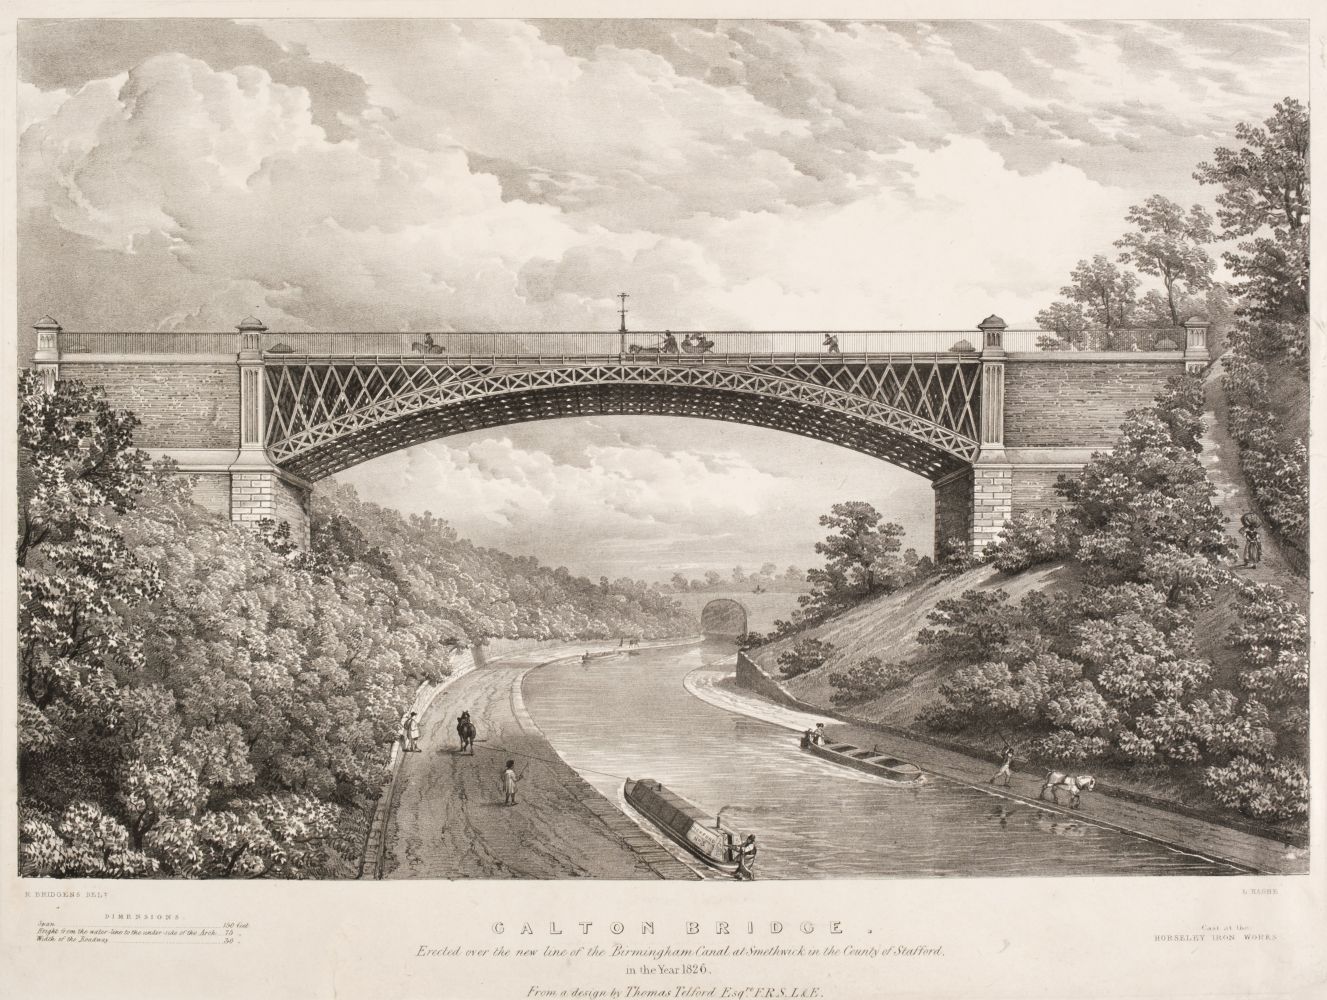 * Haghe (Louis). Galton Bridge. Erected over the new line of the Birmingham Canal at Smethwick, 1826